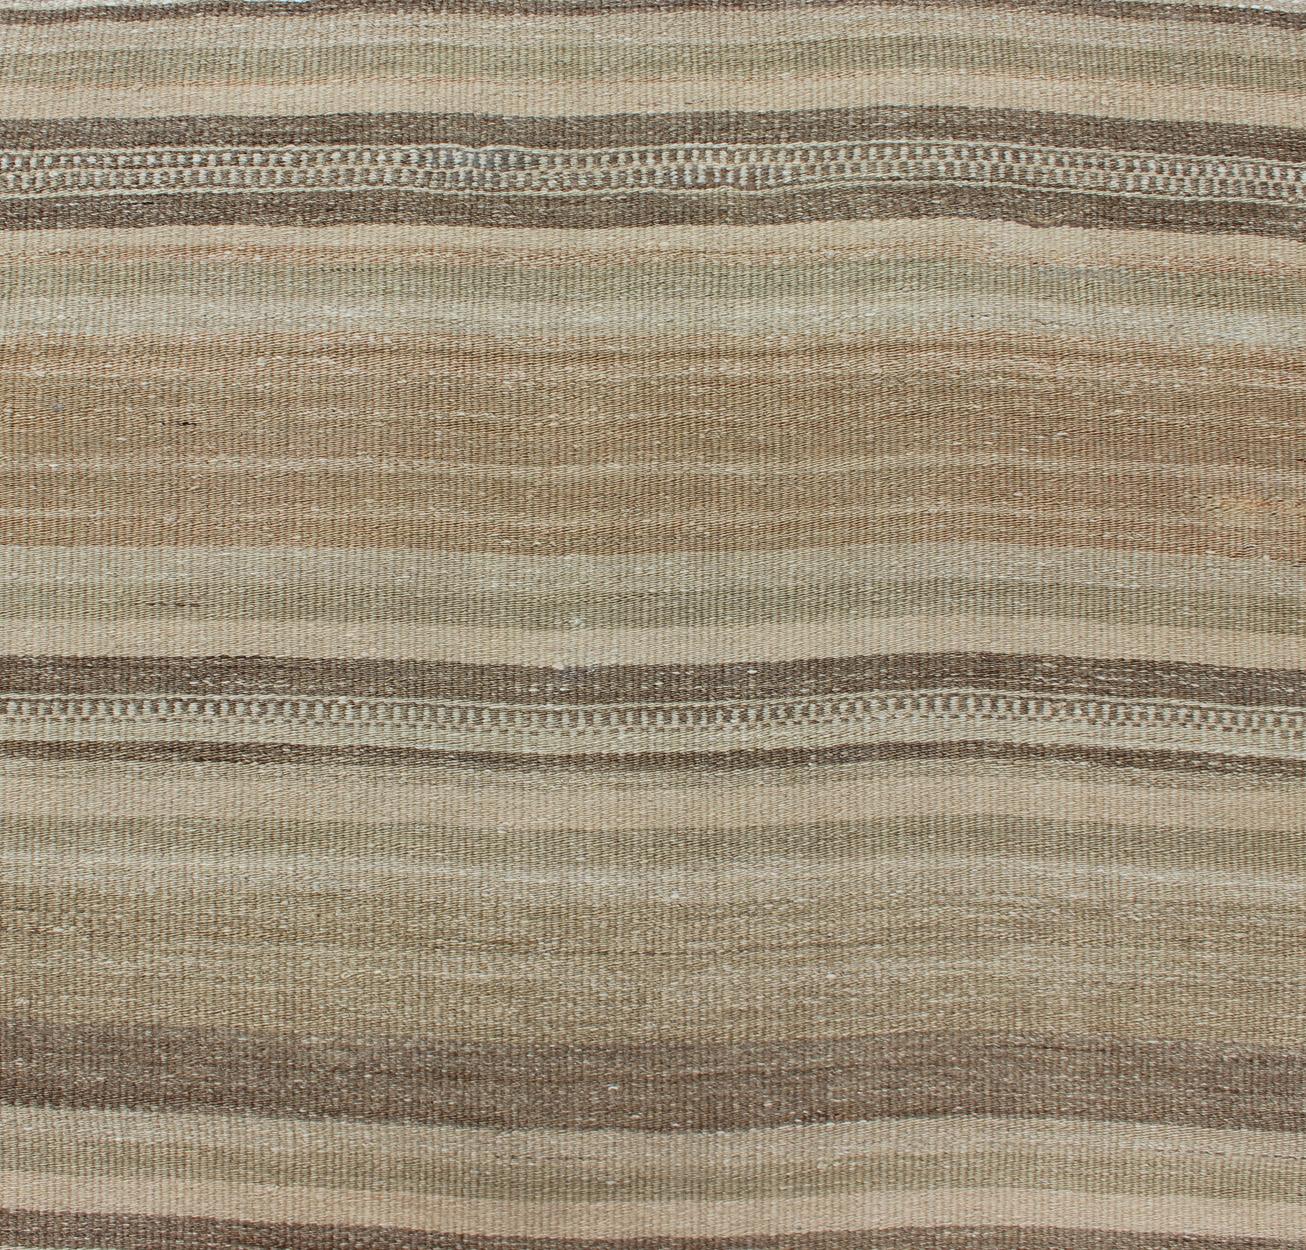 Wool Striped Vintage Turkish Flat-Weave Runner with Tans, Brown and Olive Green For Sale